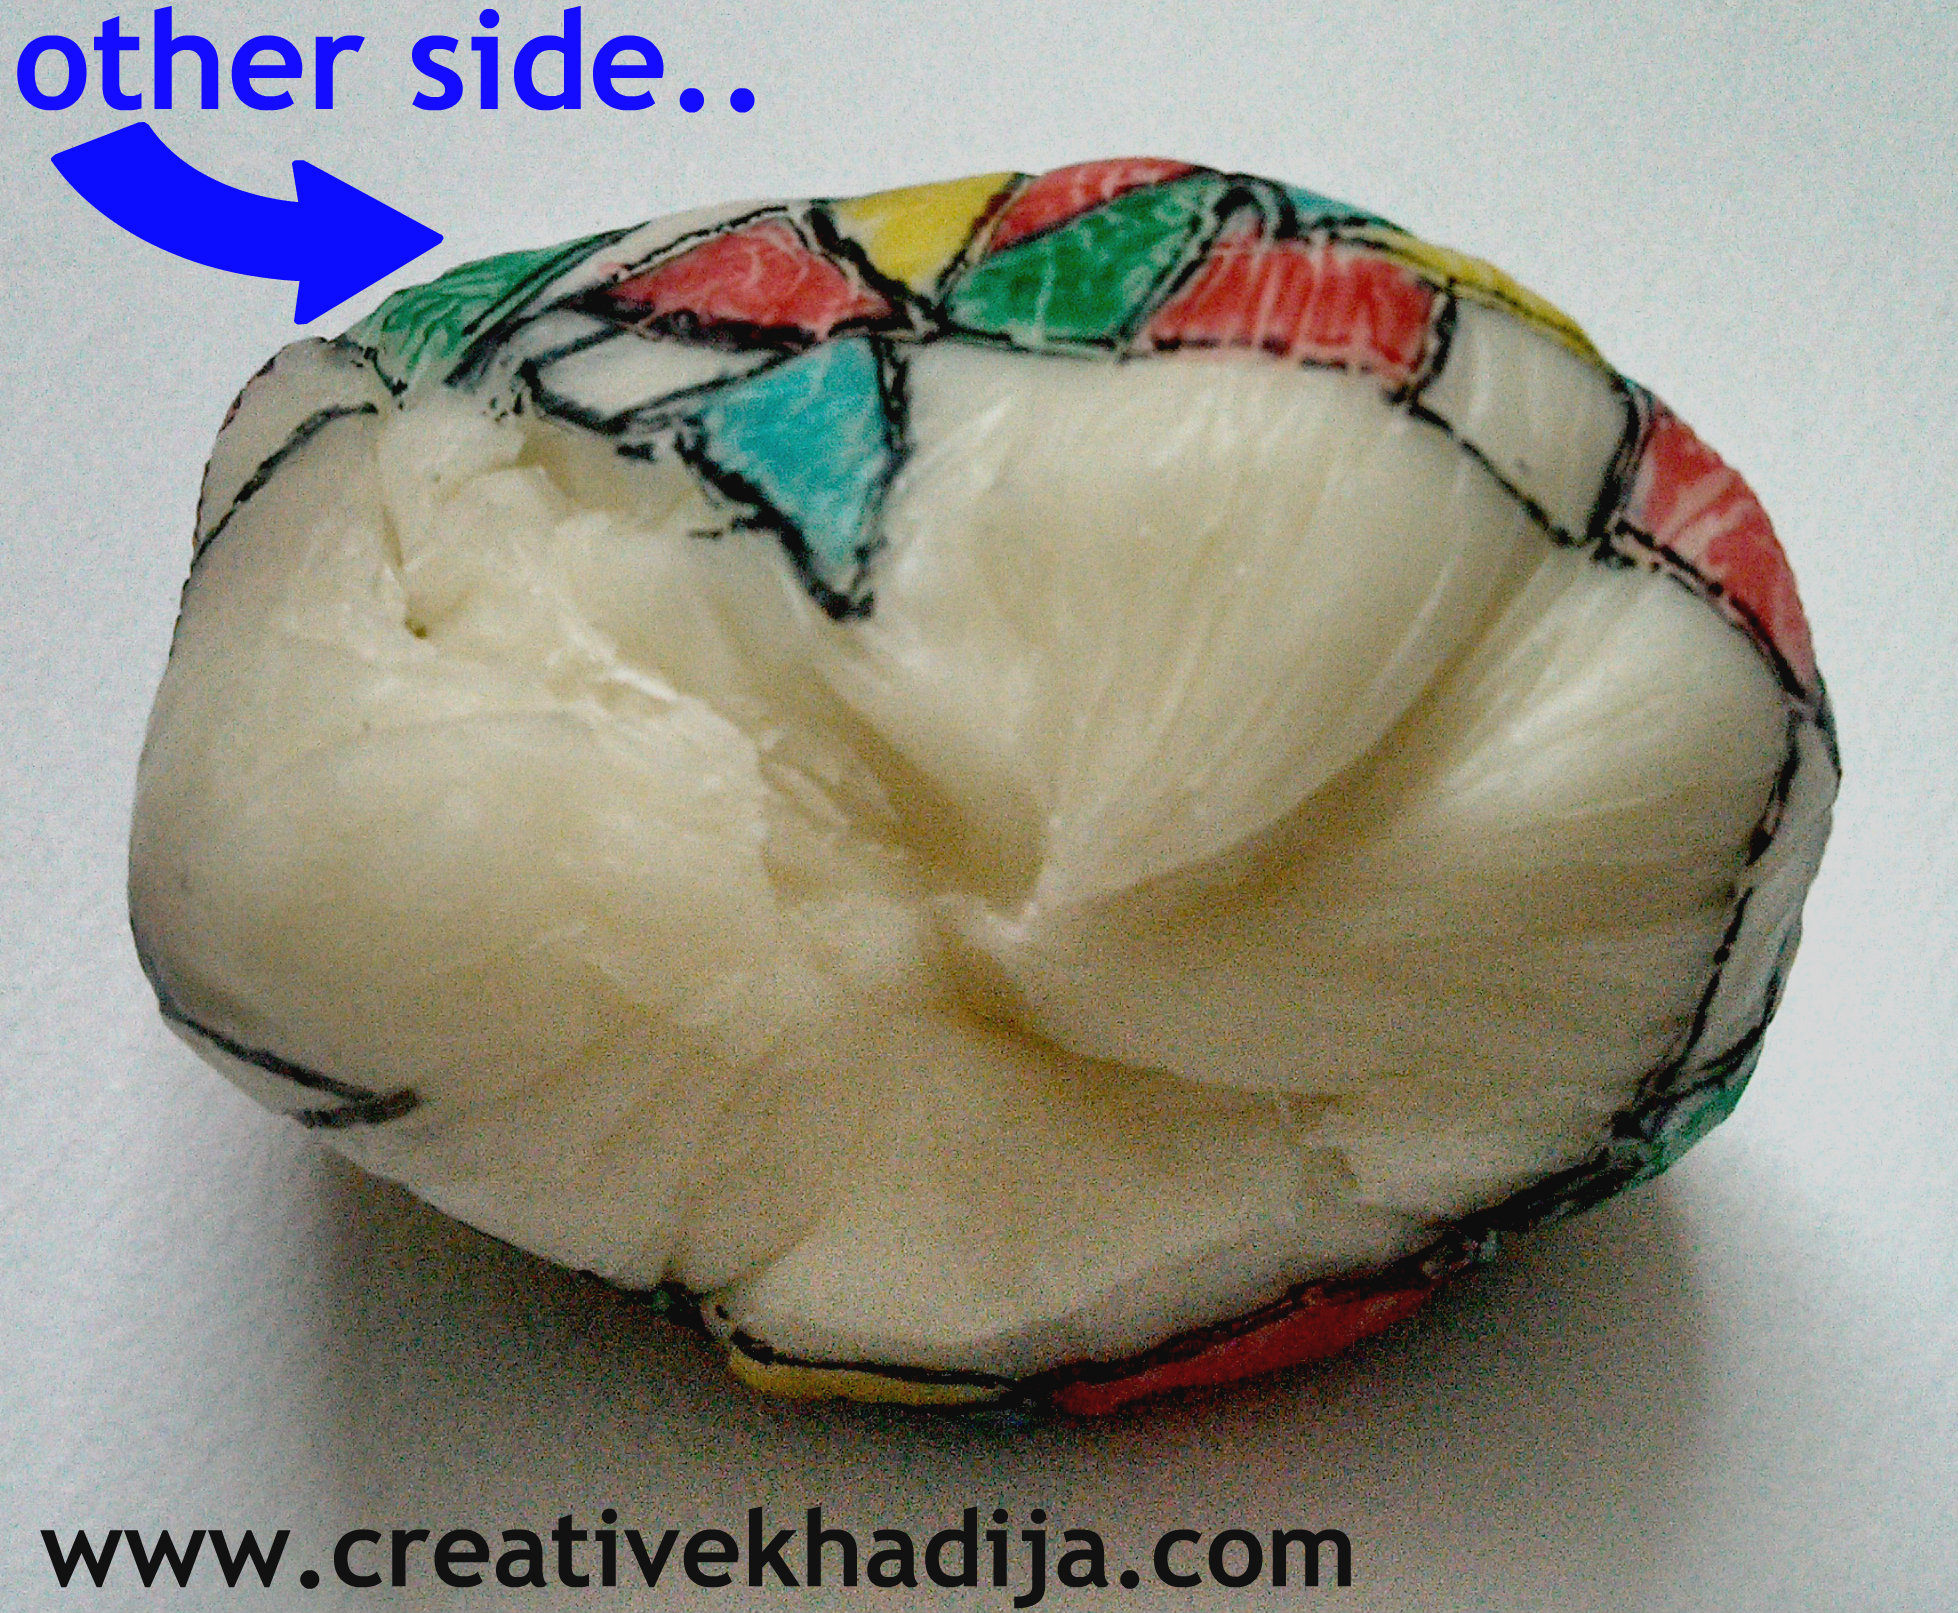 dough crafts ideas
PaperWeight Making From Trash To Treasure Upcycling Ideas